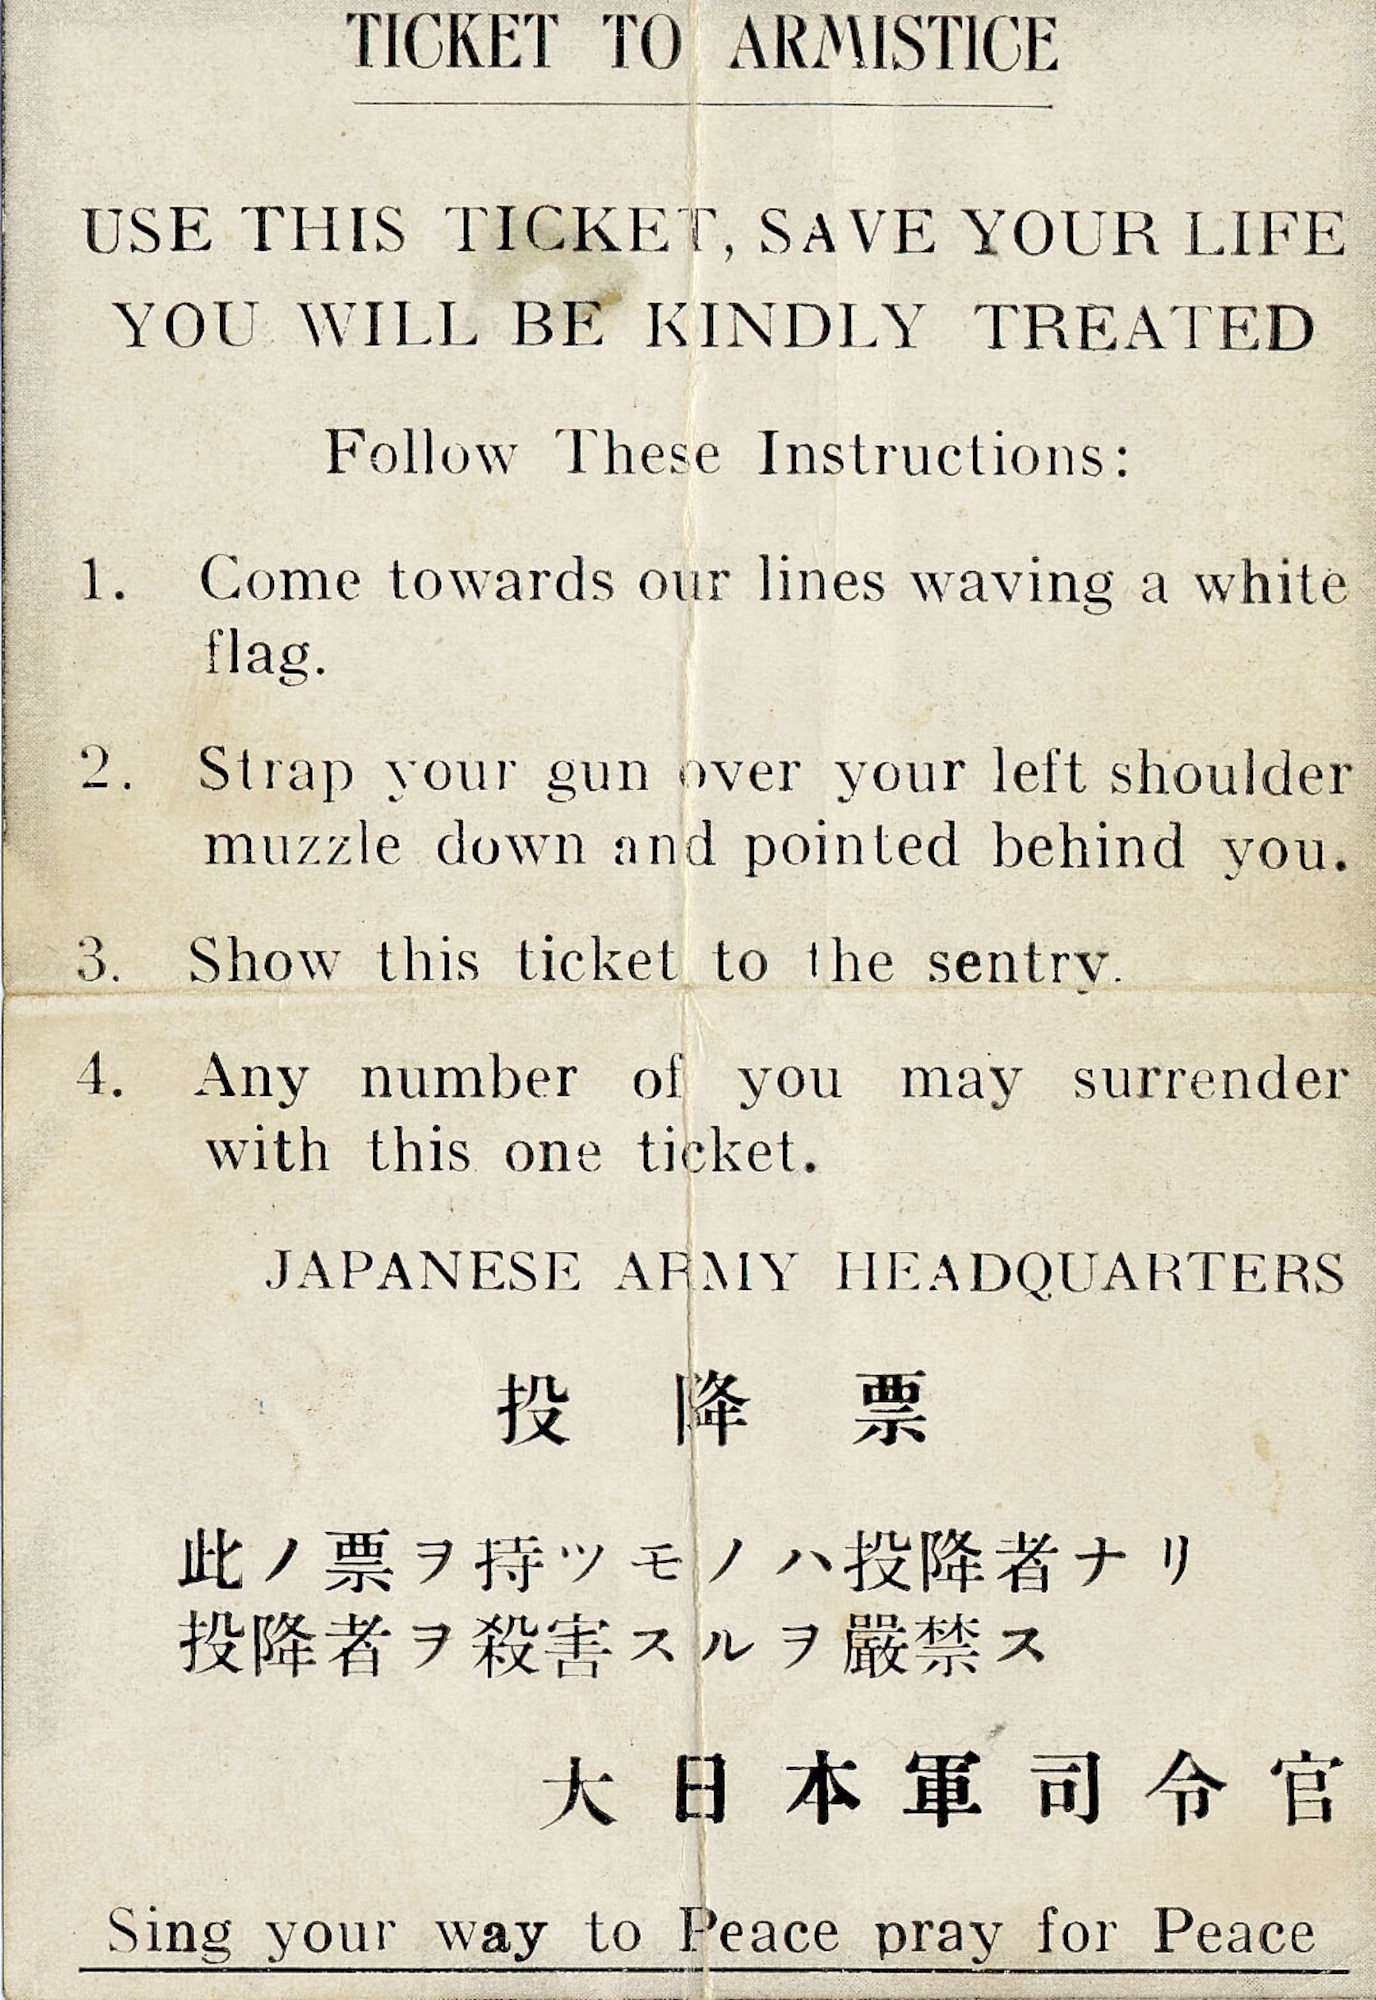 This surrender leaflet turned out to be a cruel lie. Death Marchers who were found with these were executed for not surrendering earlier when they were offered the chance. (U.S. Air Force photo)